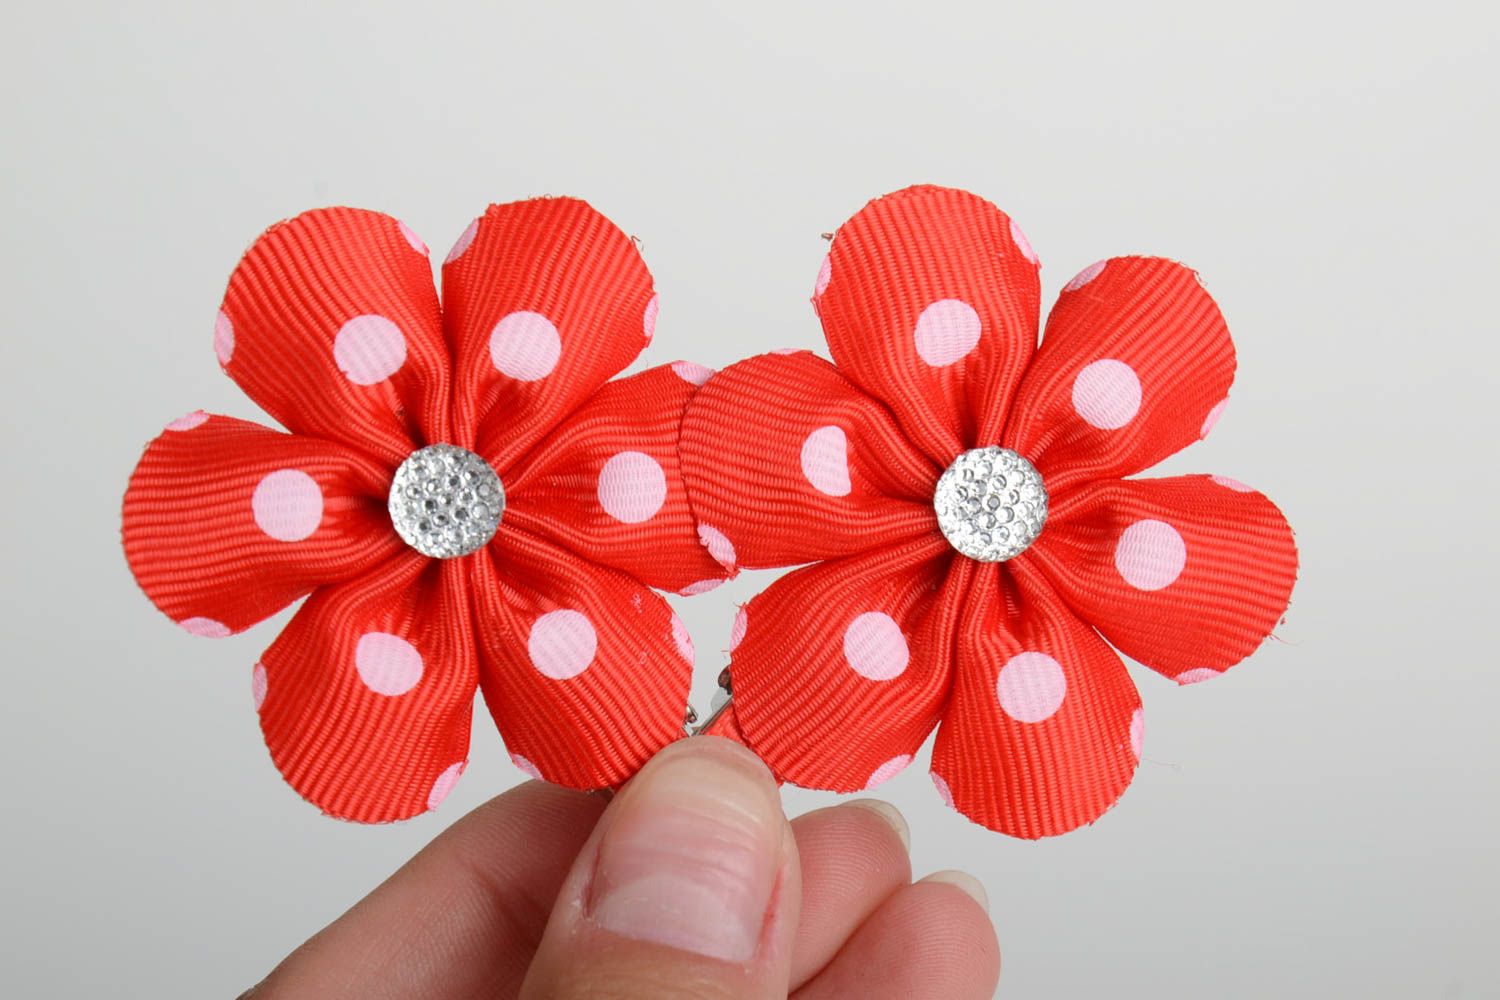 Handmade hair clips with red polka dot satin ribbon flowers set of 2 items photo 5